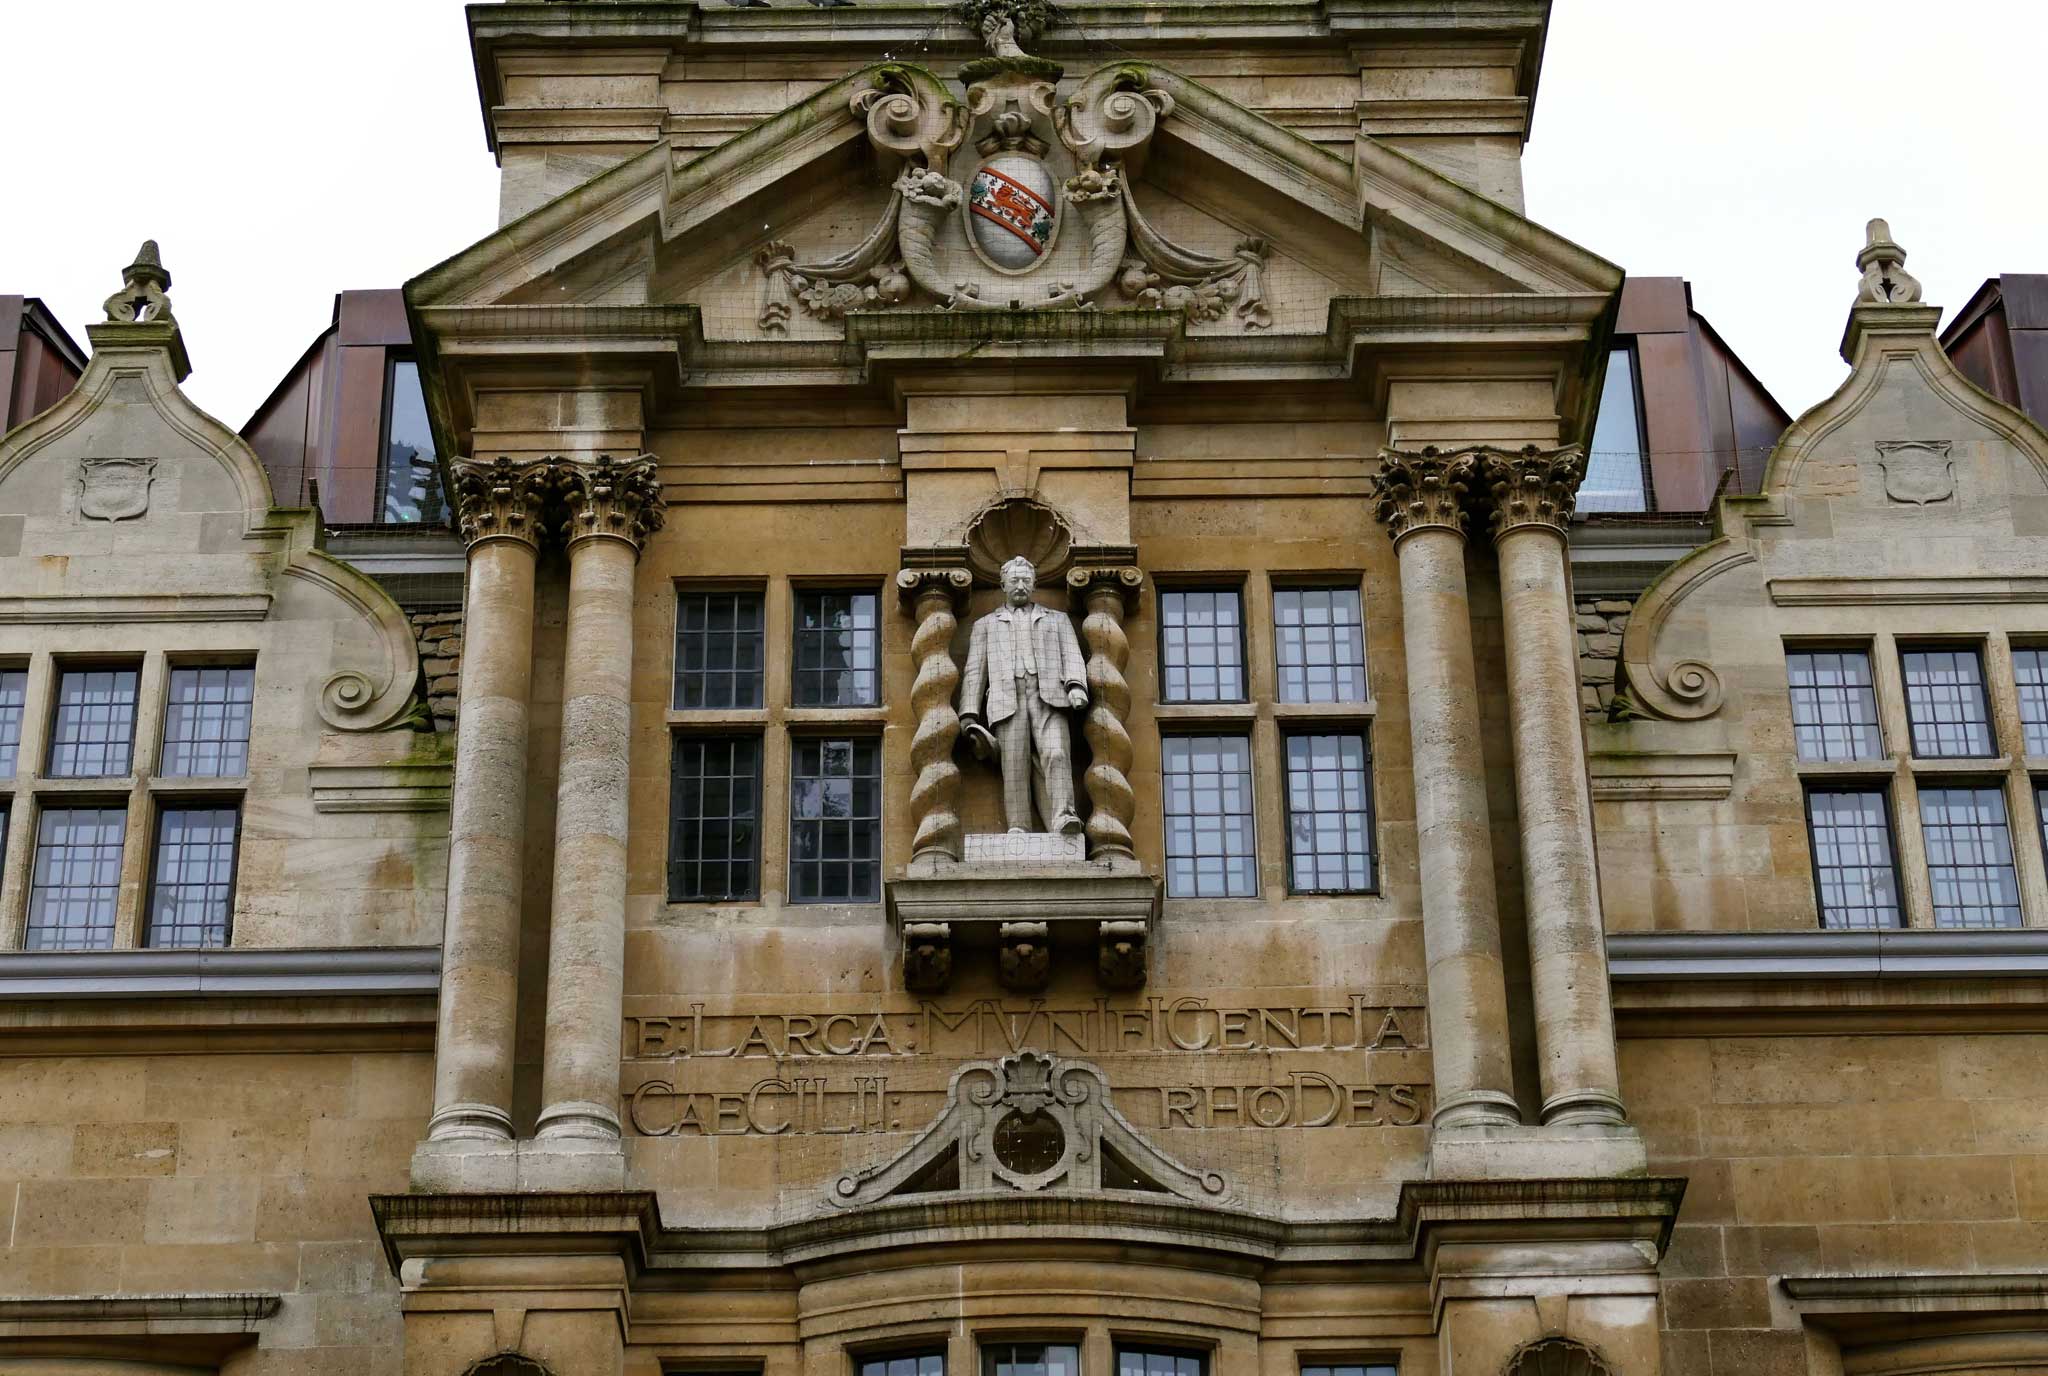 The statue of Cecil Rhodes, pictured, outside Oriel College, Oxford